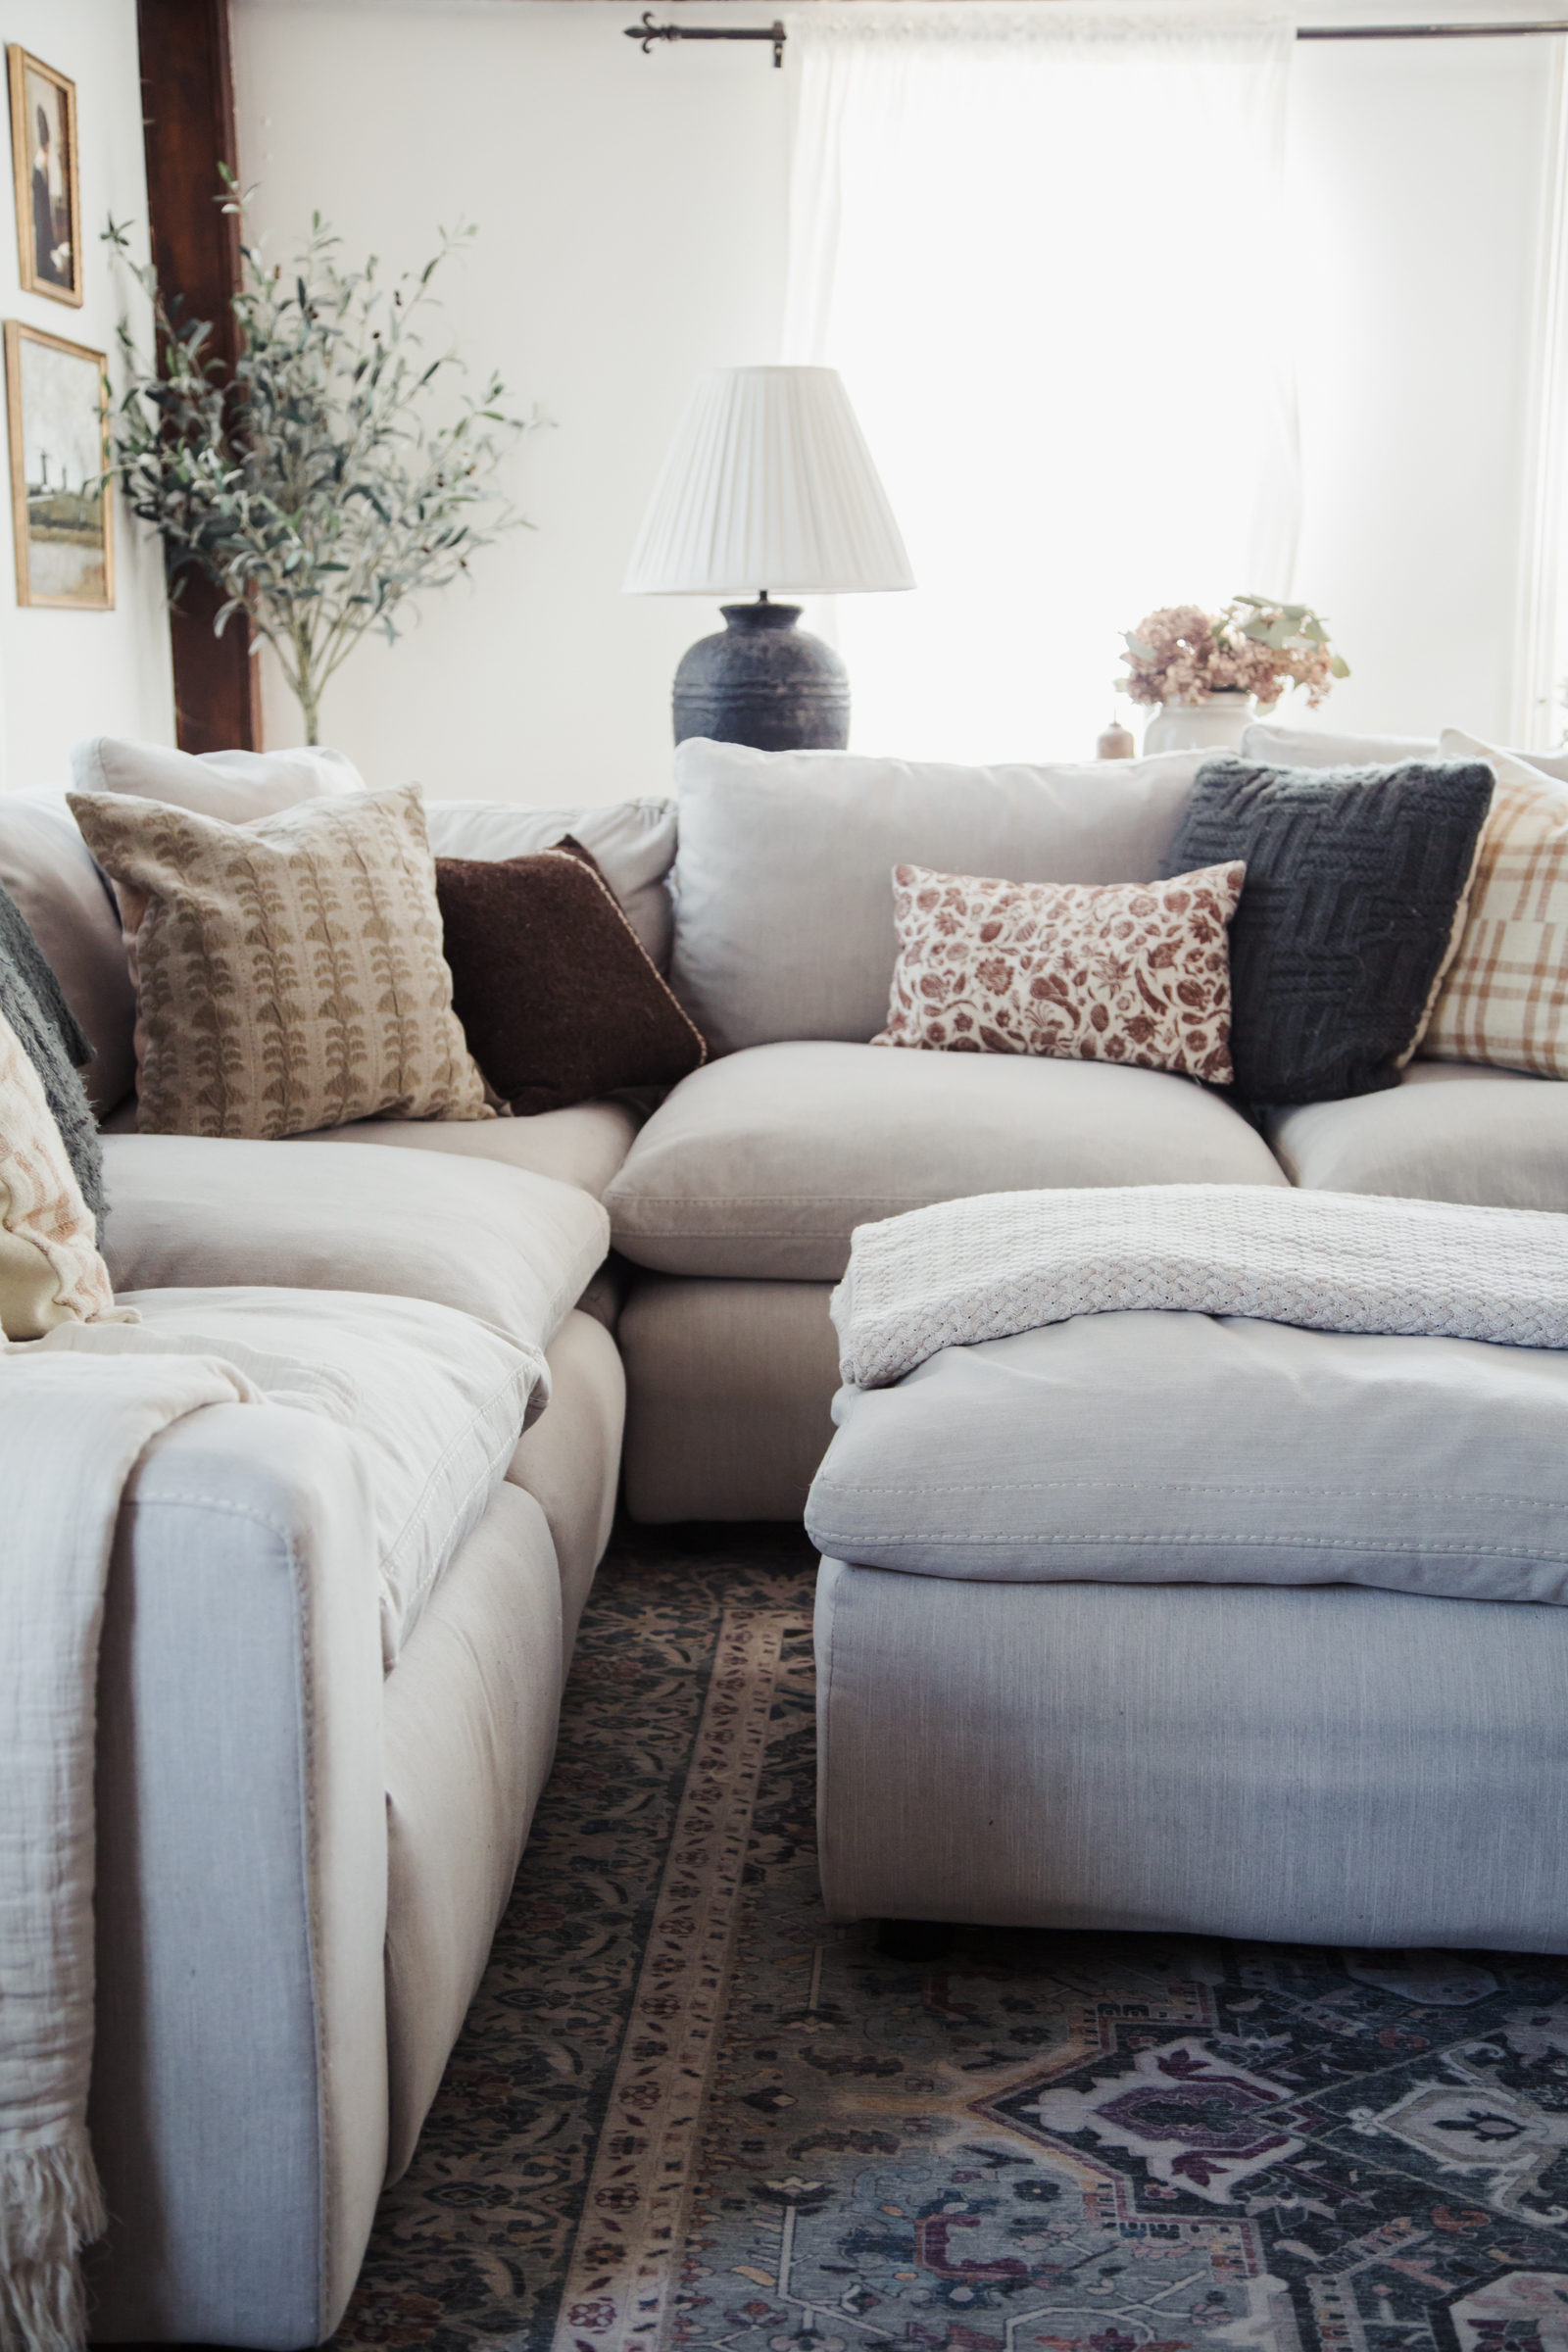 How to Put More Filling in Sofa & Couch Pillows : Couches & Living